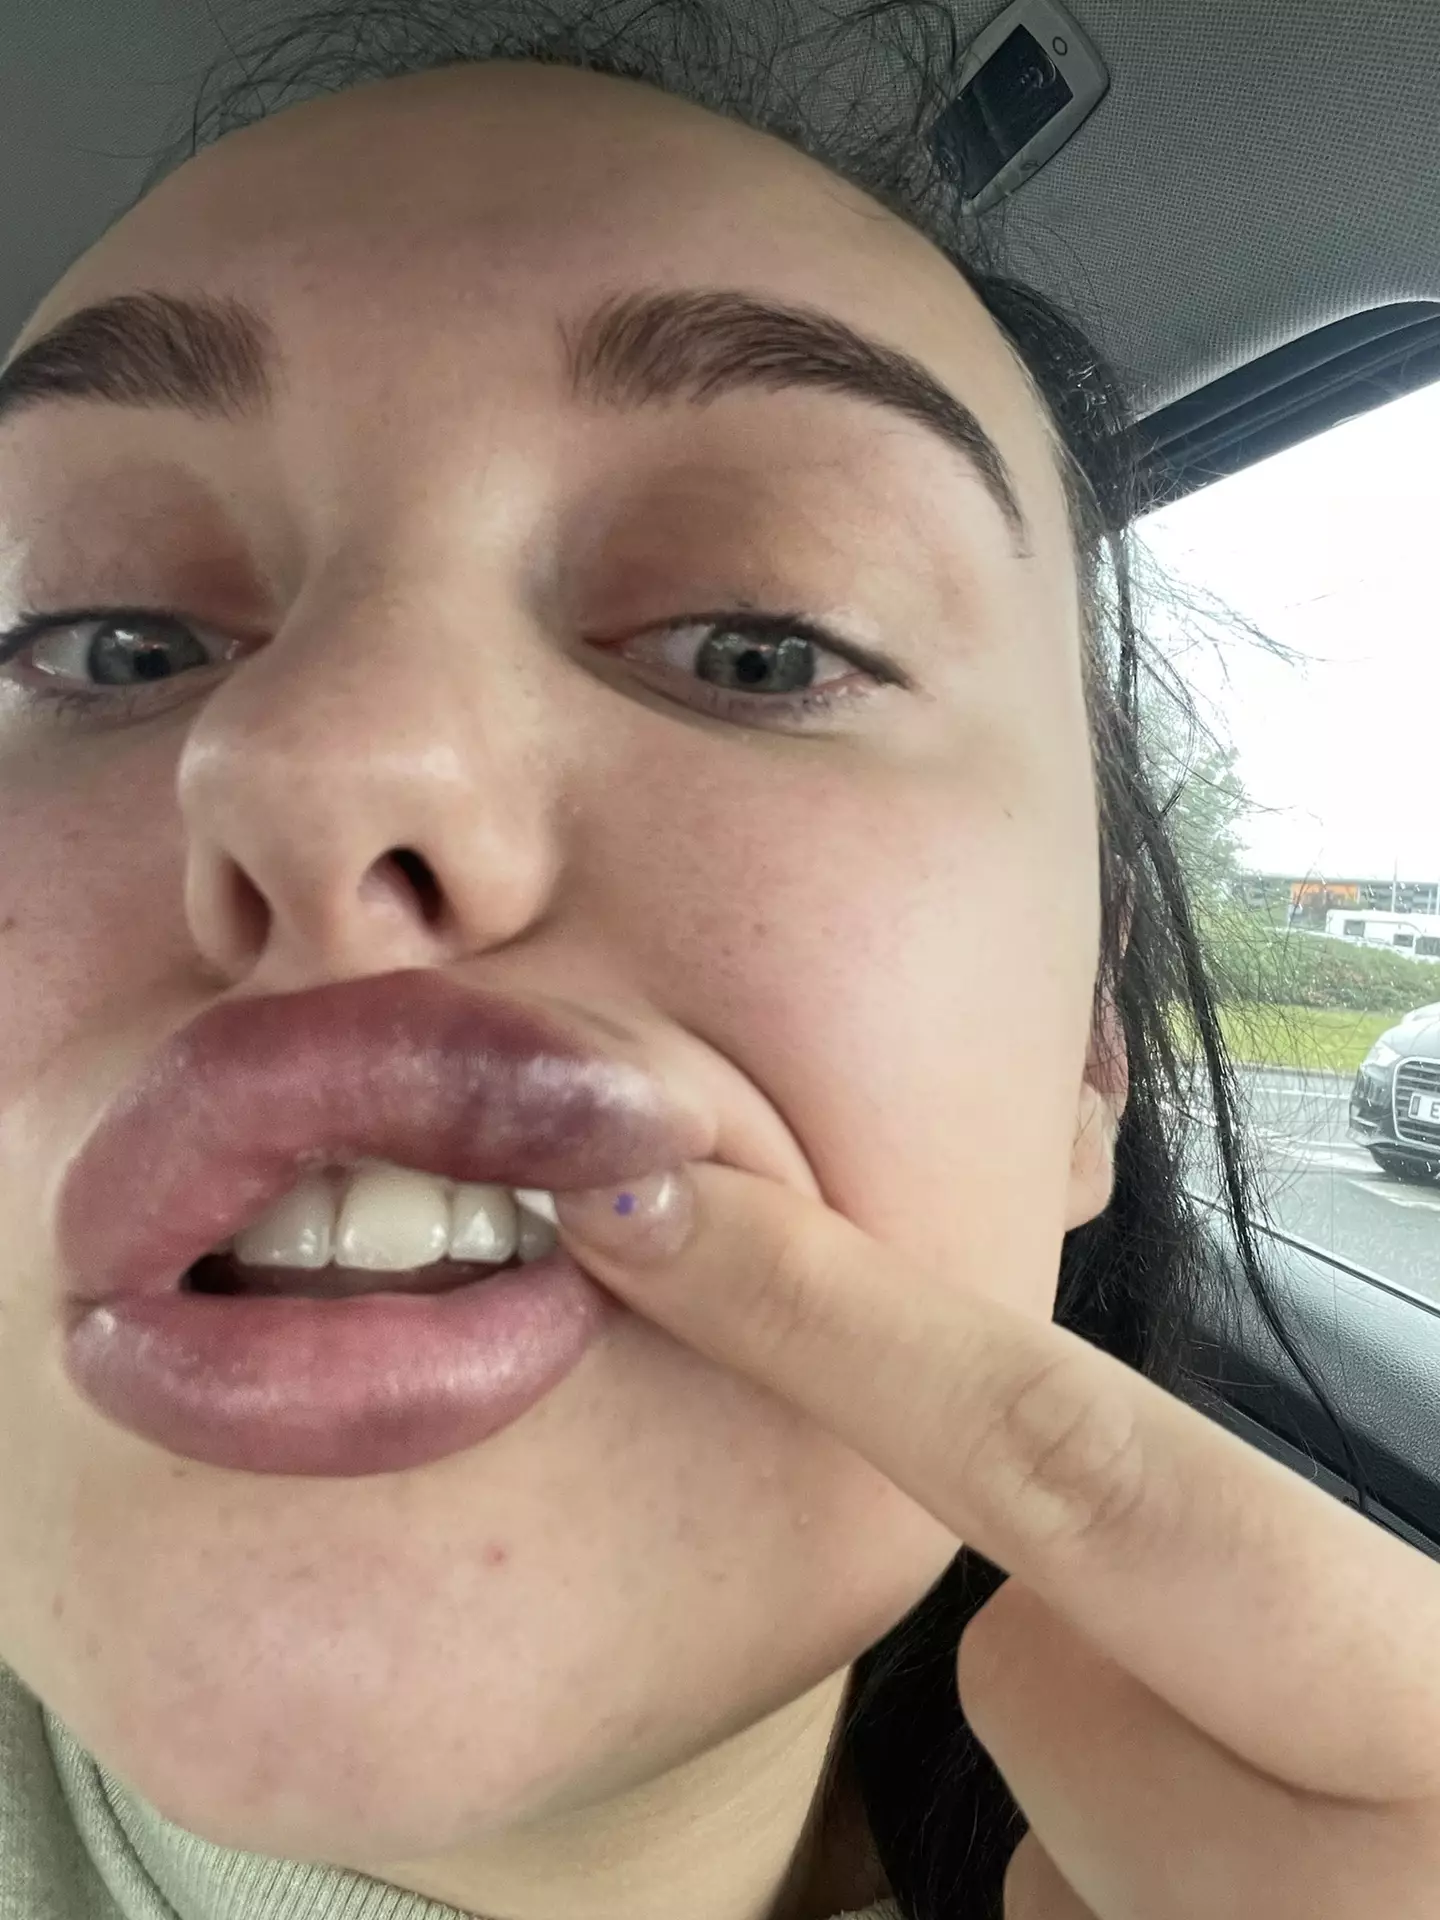 Doctors said Amy was lucky to still have her lip (